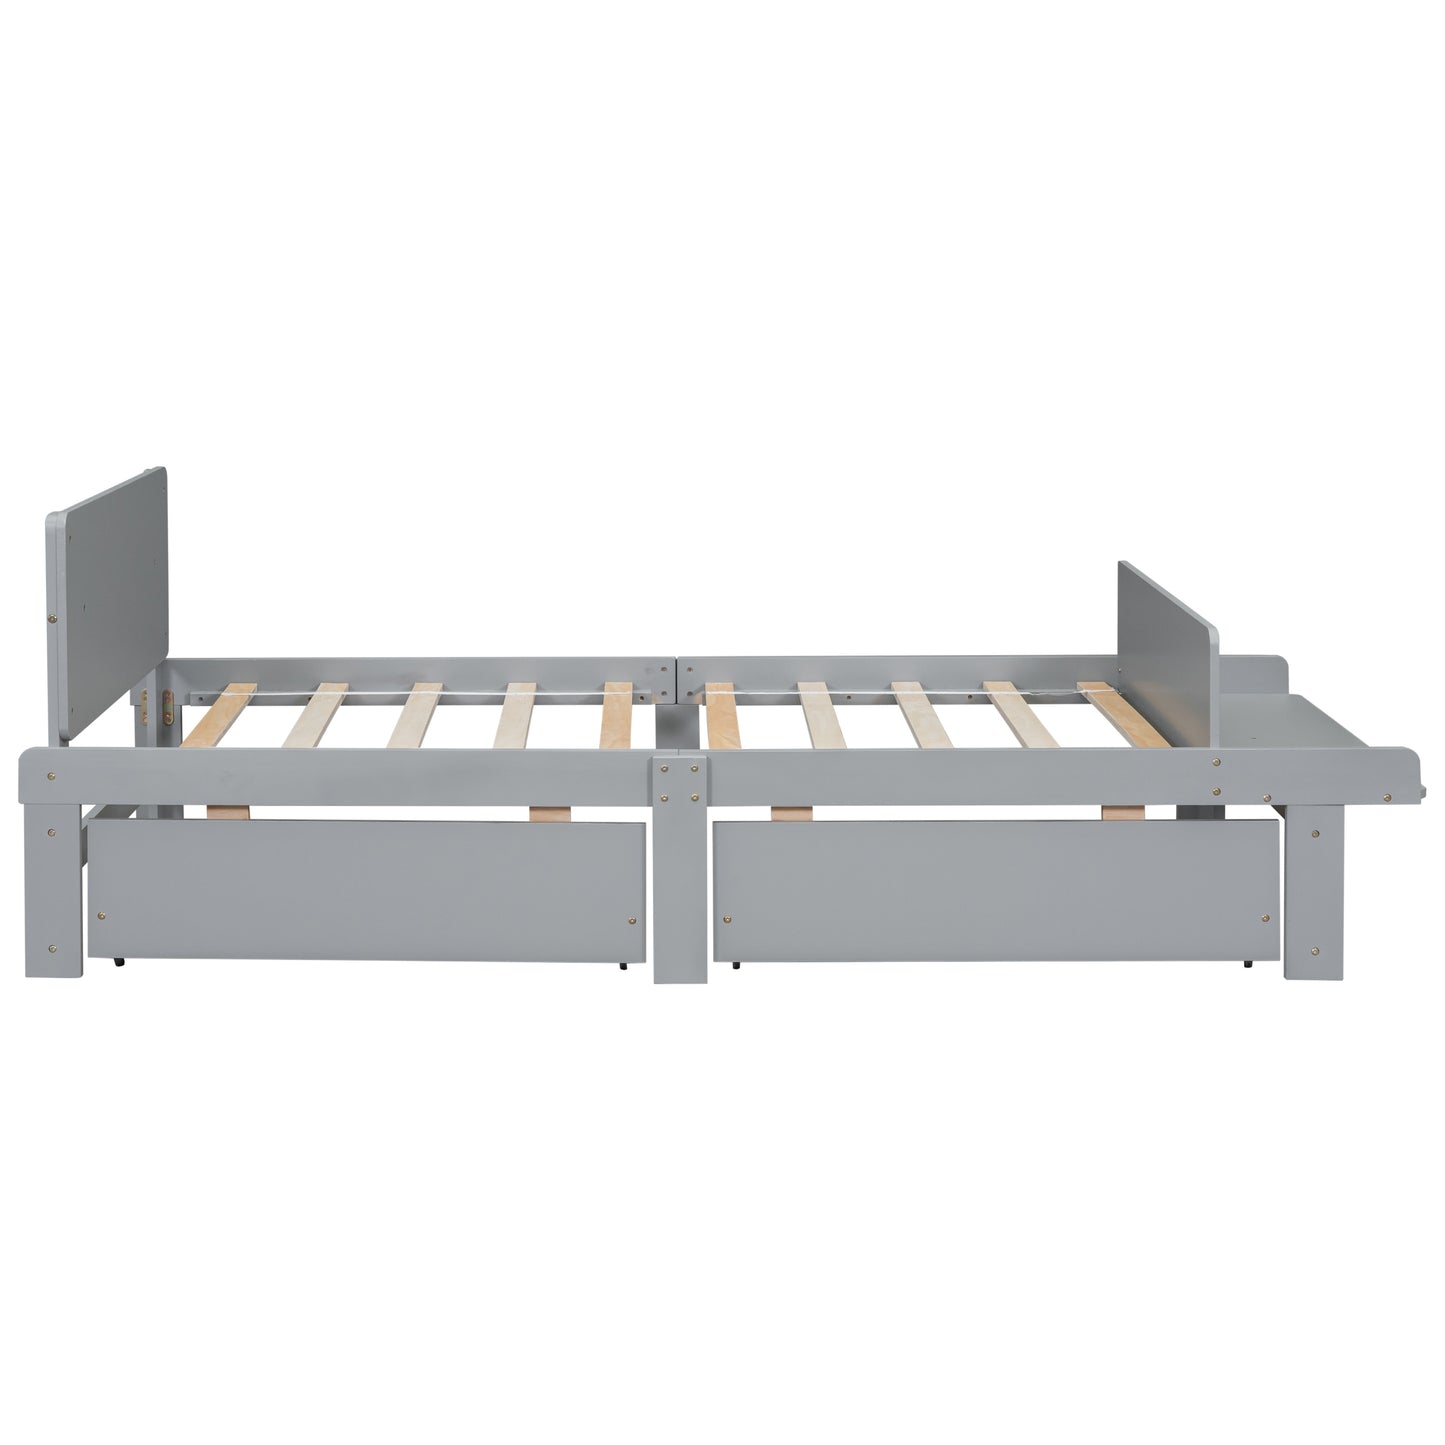 Twin Platform Bed with Footboard Bench, 2 drawers,Grey